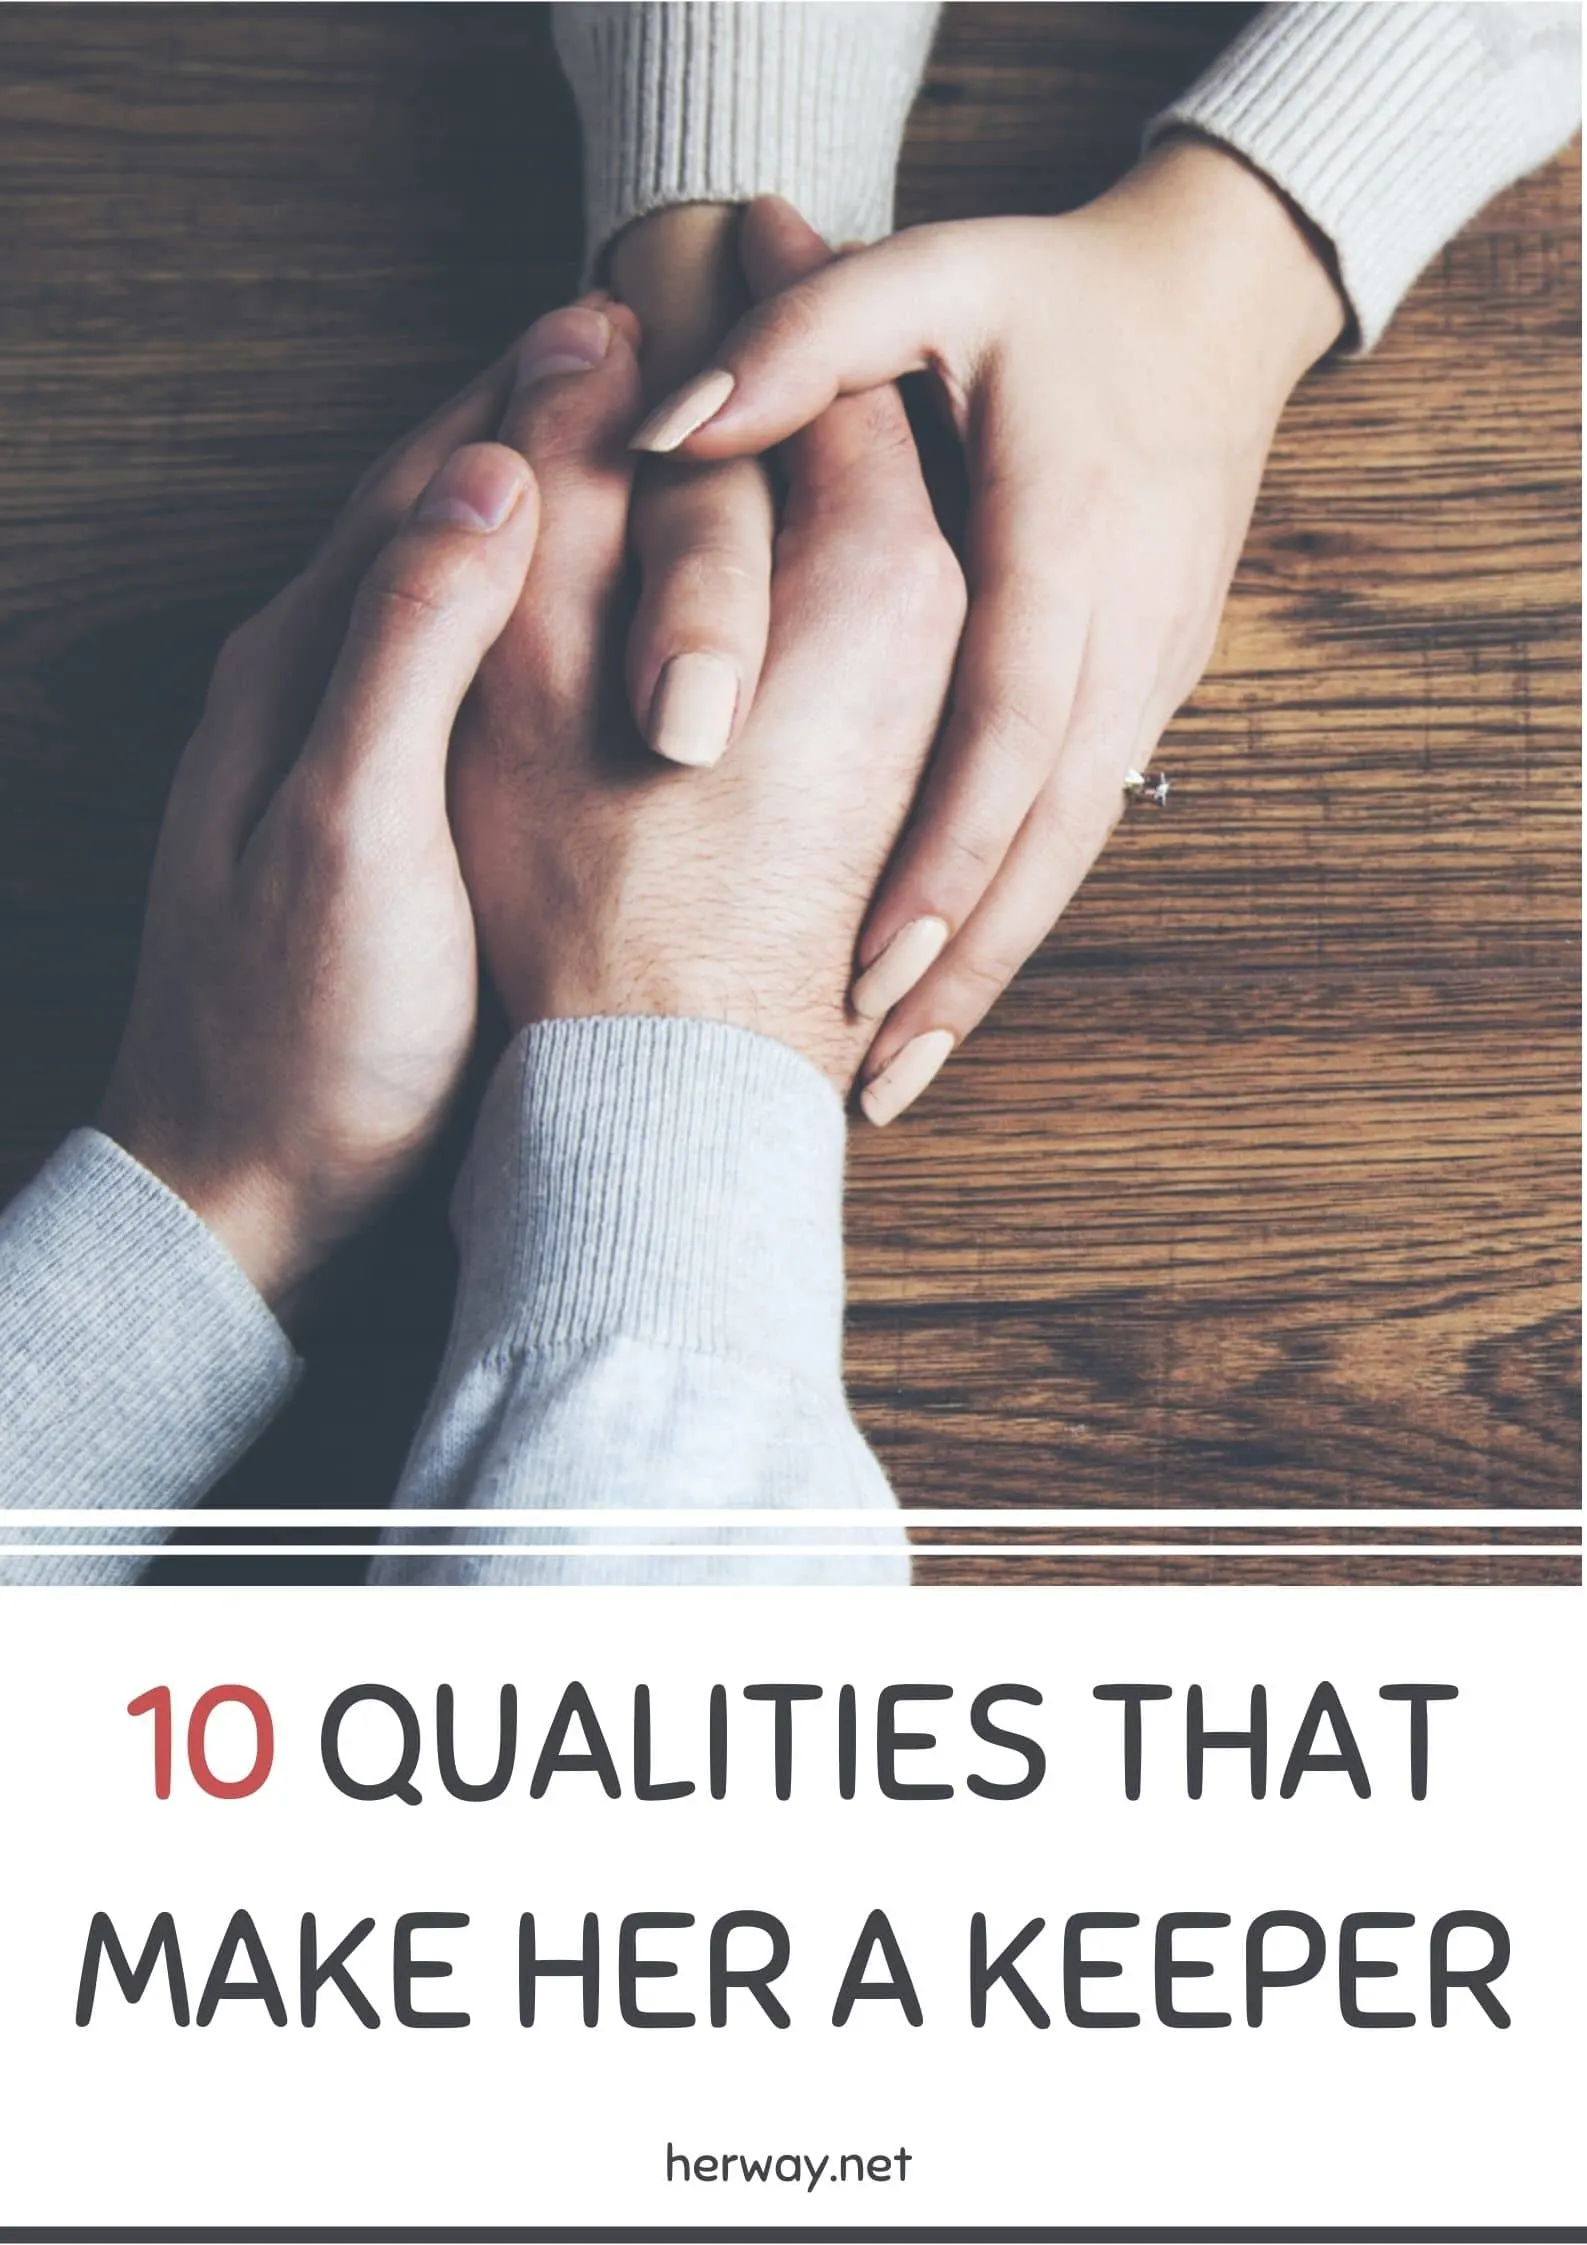 10 Qualities that Make Her a Keeper